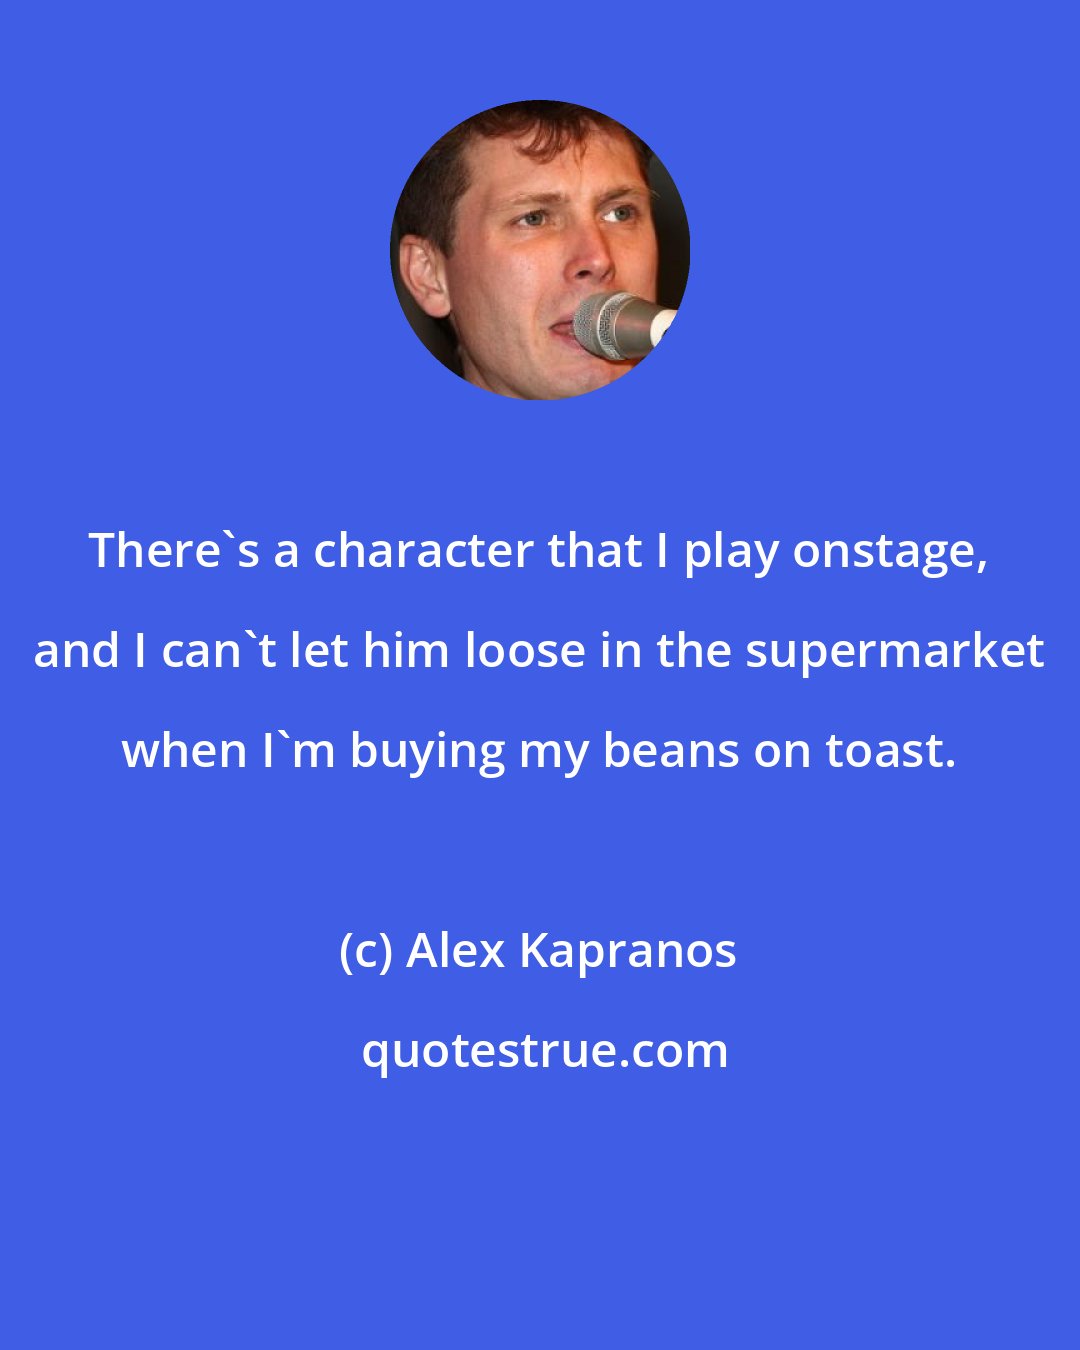 Alex Kapranos: There's a character that I play onstage, and I can't let him loose in the supermarket when I'm buying my beans on toast.